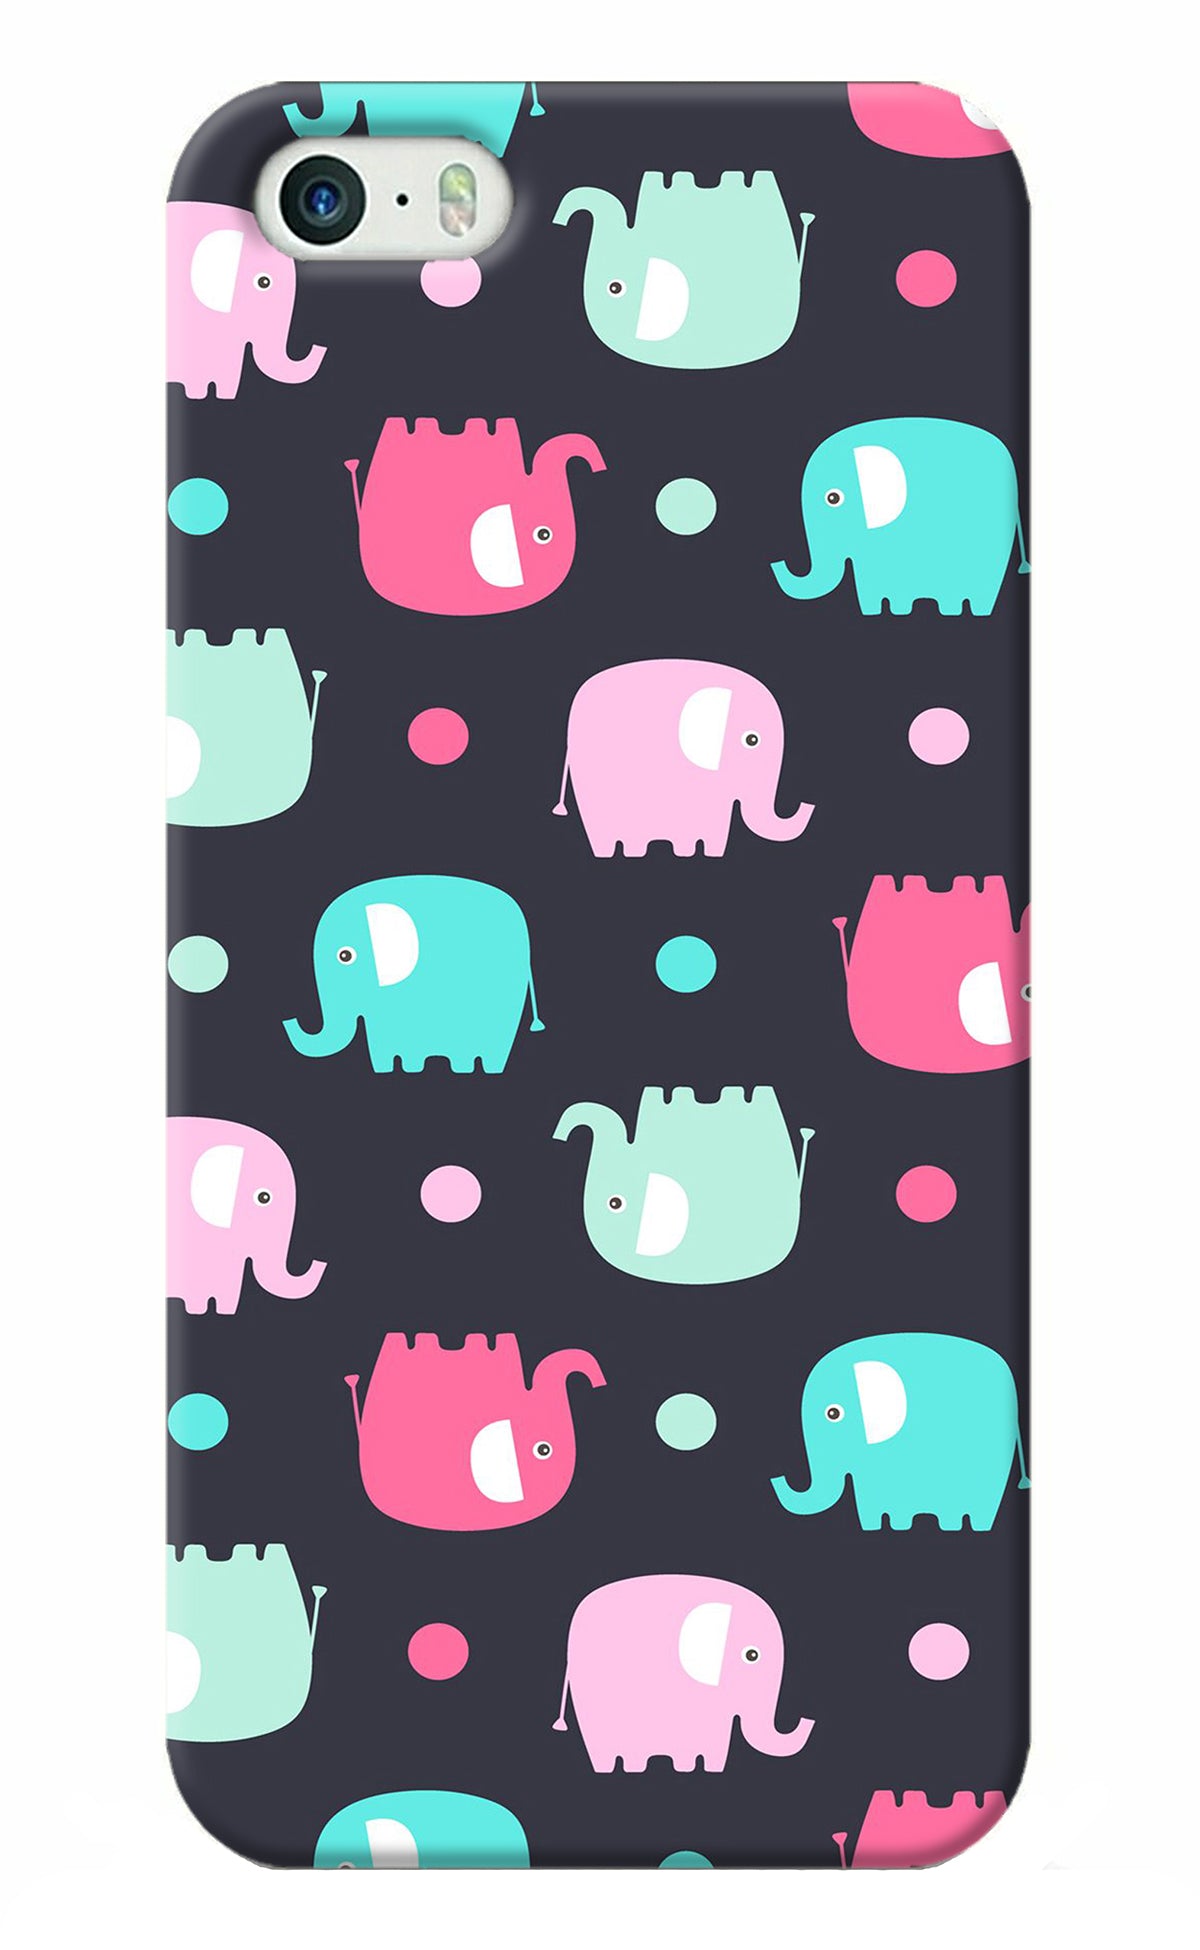 Elephants iPhone 5/5s Back Cover